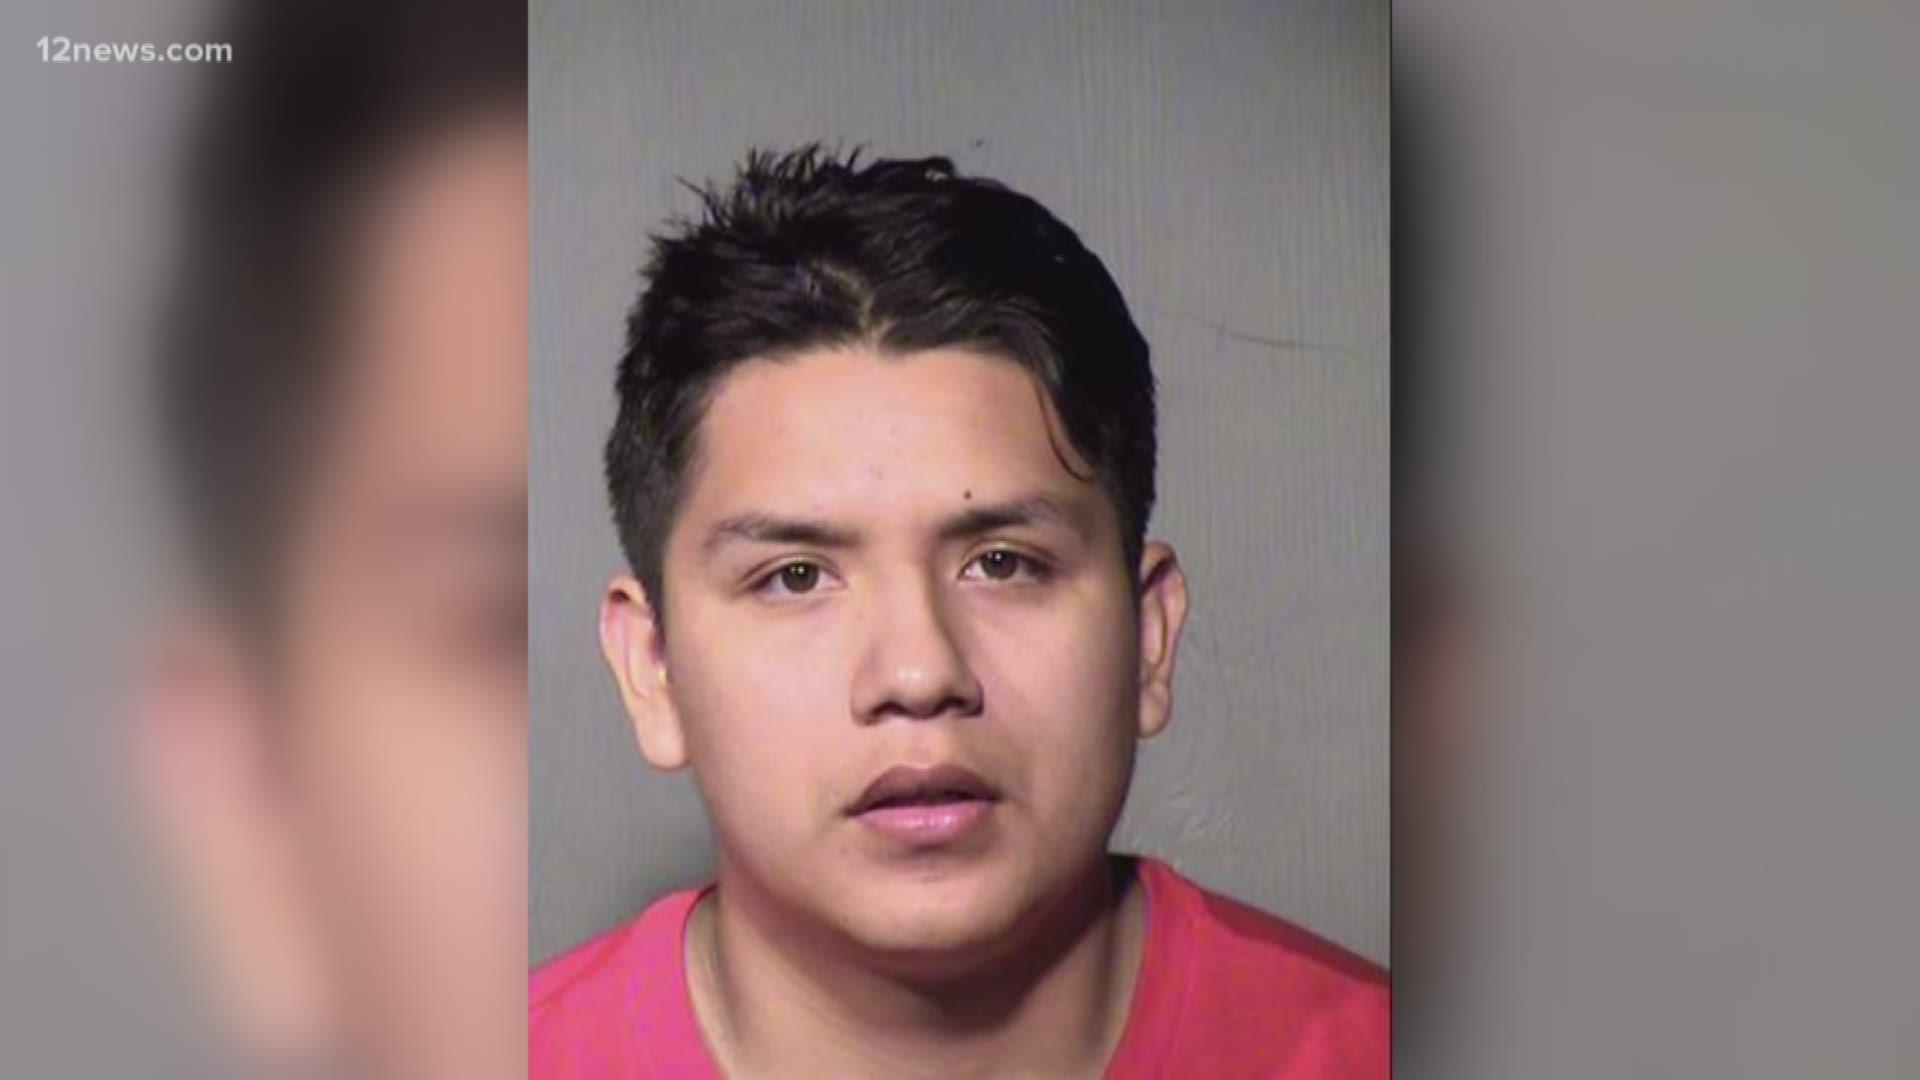 According to Tempe Police, 20-year-old Brandon Osario Hernandez worked with teenagers at an LDS Church on del Rio in Tempe. According to court documents, the teen had been in a relationship with Hernandez's younger brother and they do not think Hernandez targeted anyone else in the church group.